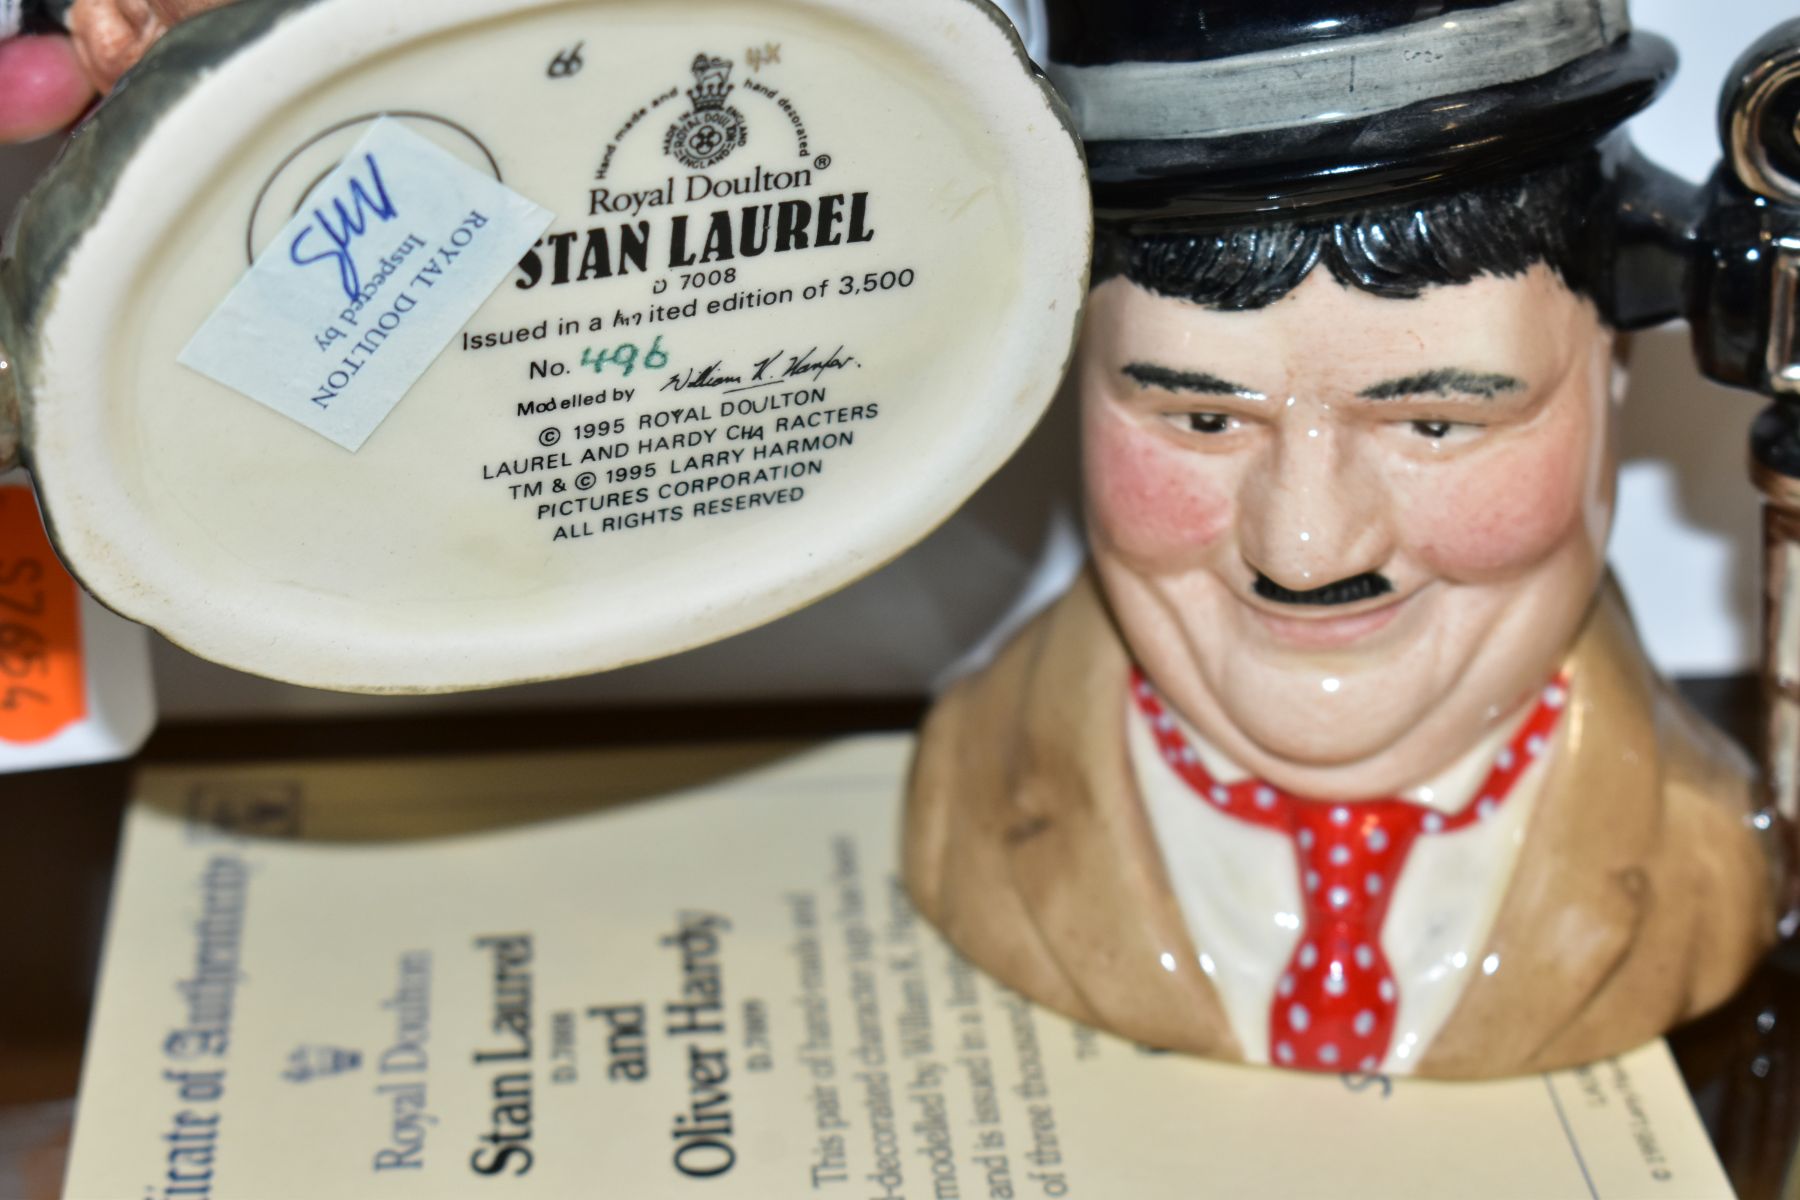 A PAIR OF ROYAL DOULTON LIMITED EDITION CHARACTER JUGS, from Laurel and Hardy, Stan Laurel D7008 and - Image 4 of 4